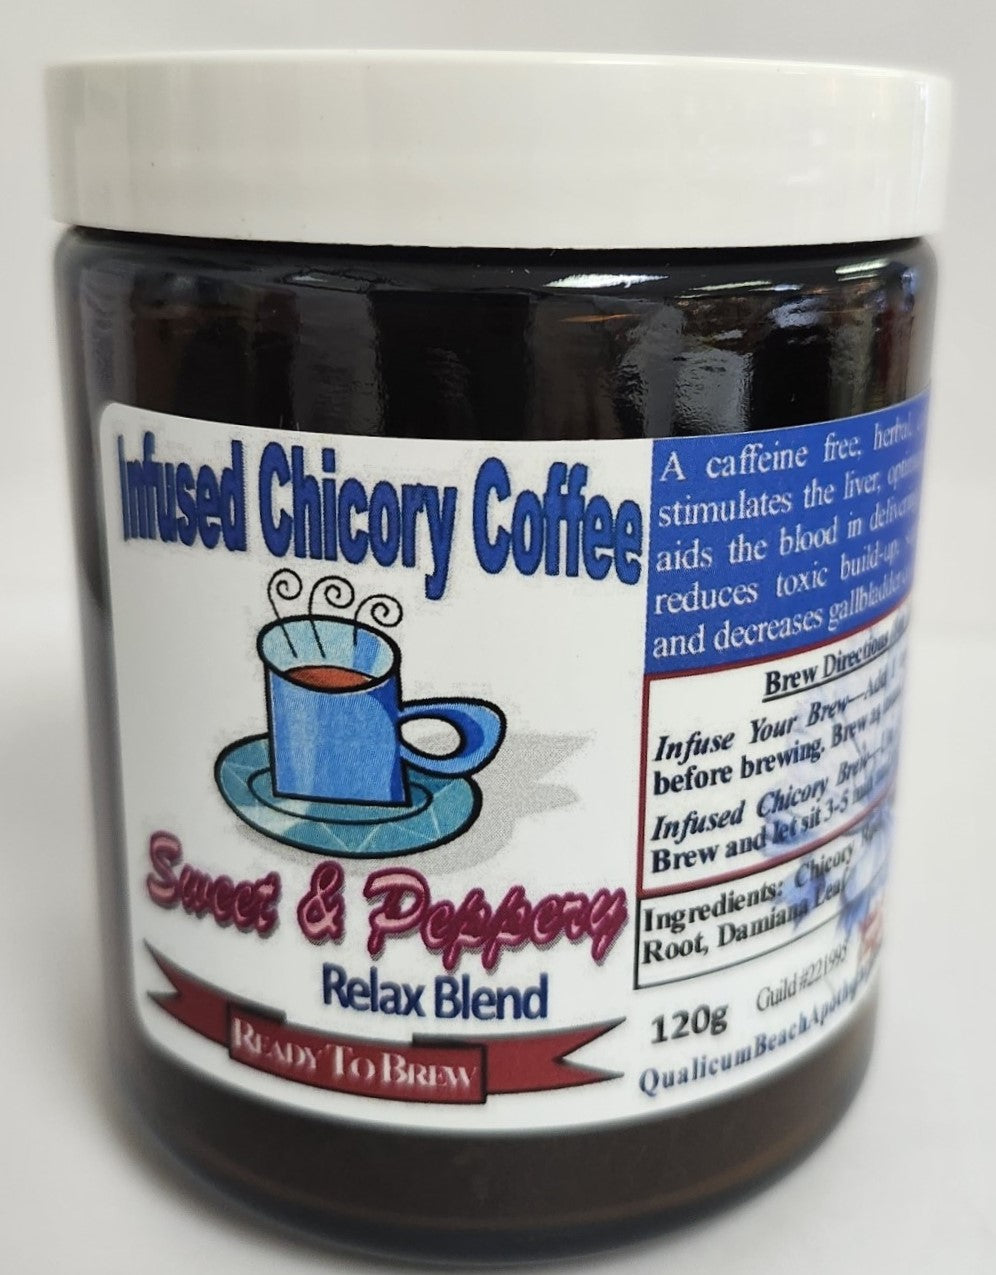 Organic Remedy, Herbal-Infused Chicory Coffee-Relax Blend